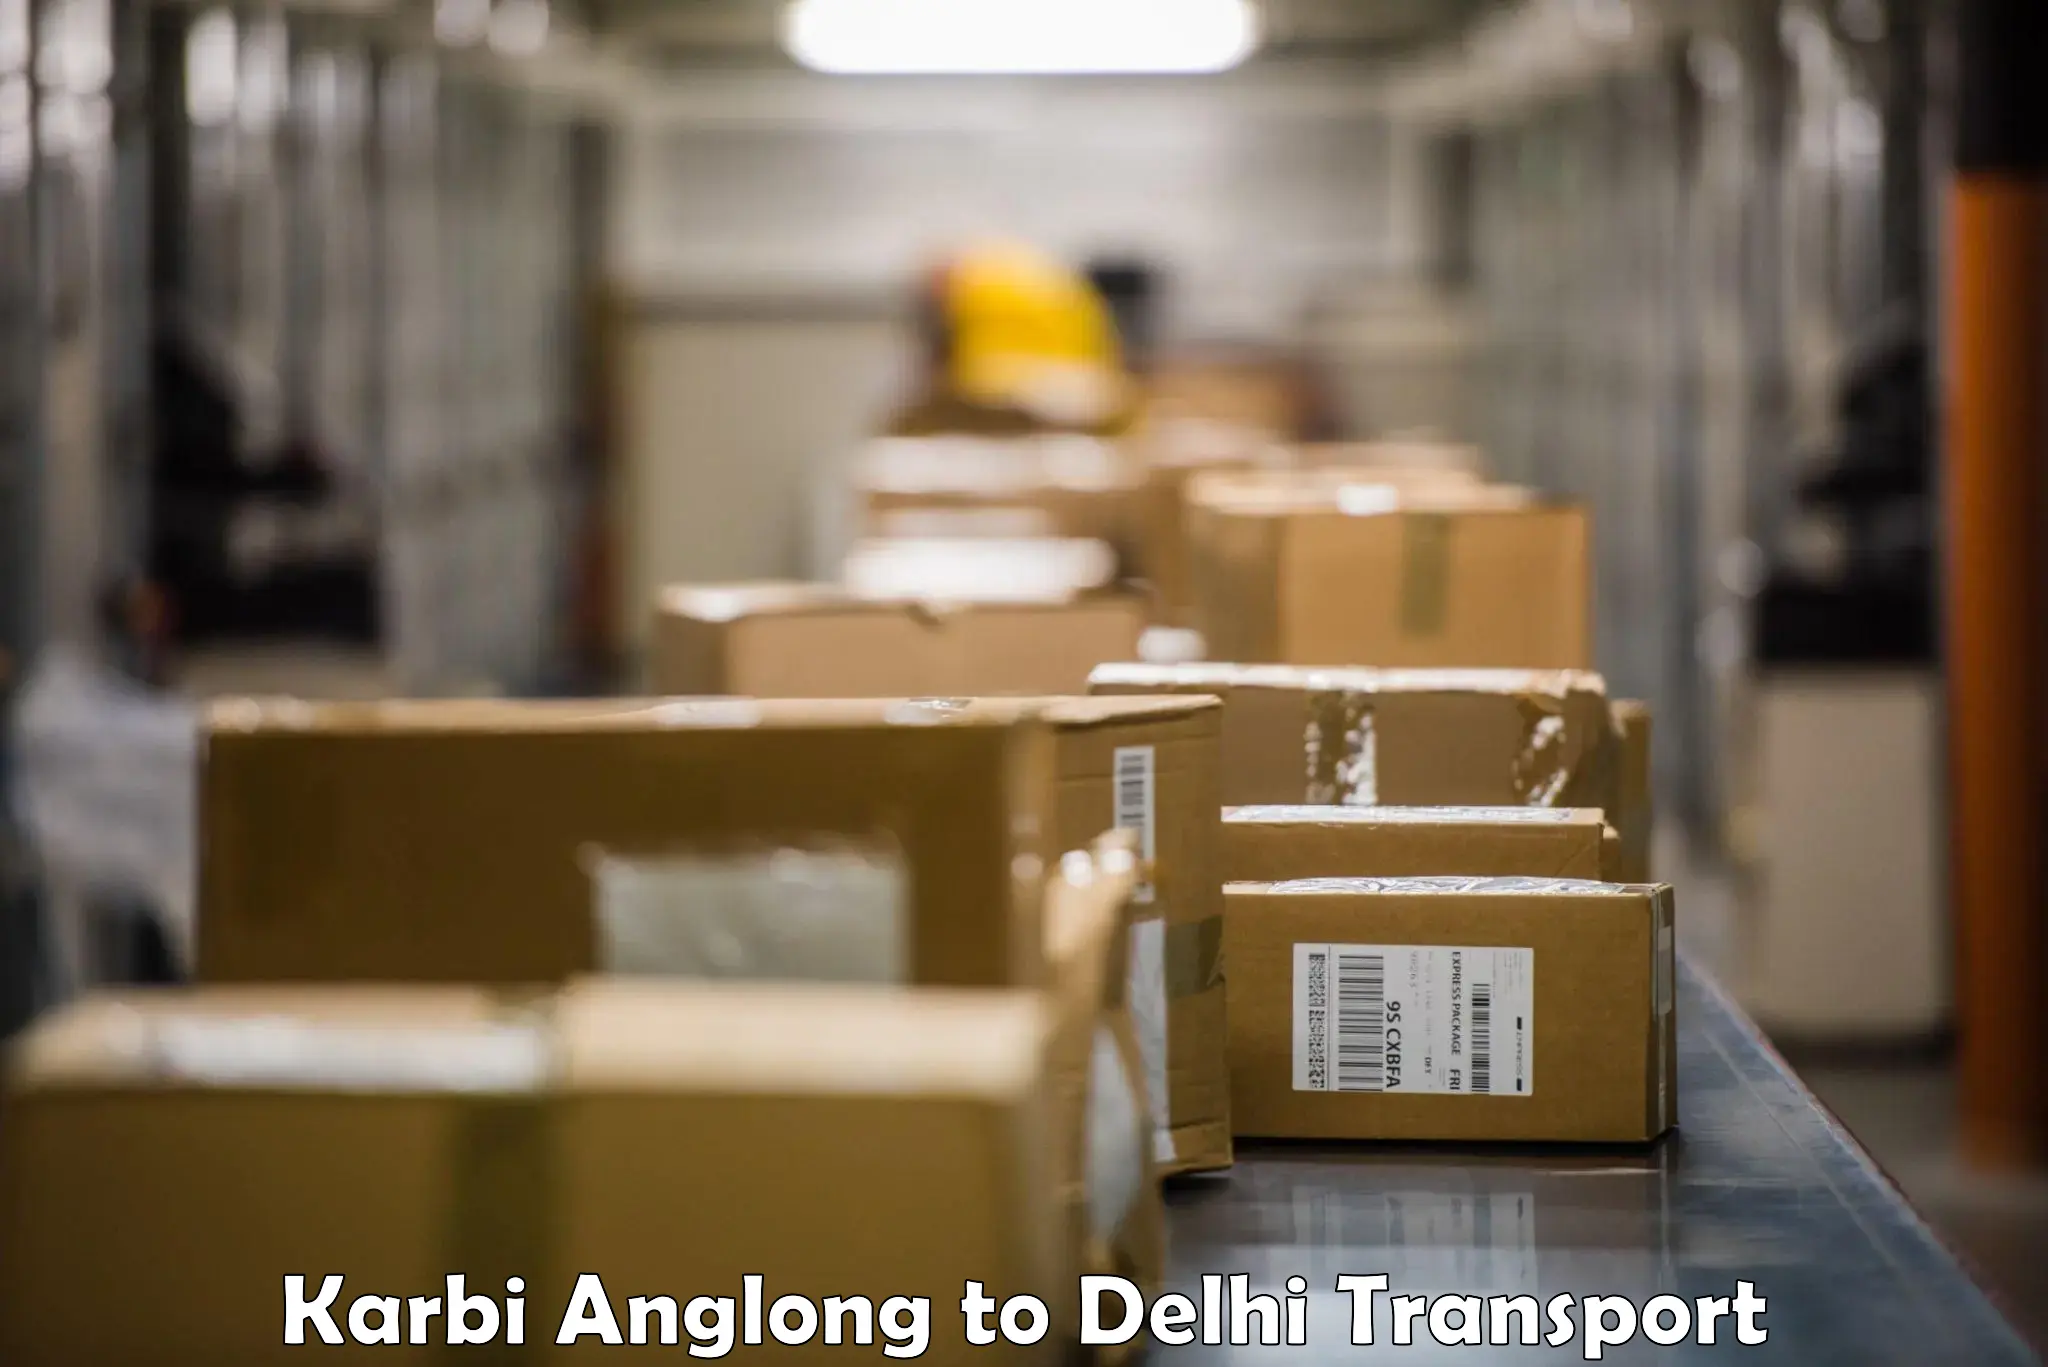 Container transport service Karbi Anglong to Delhi